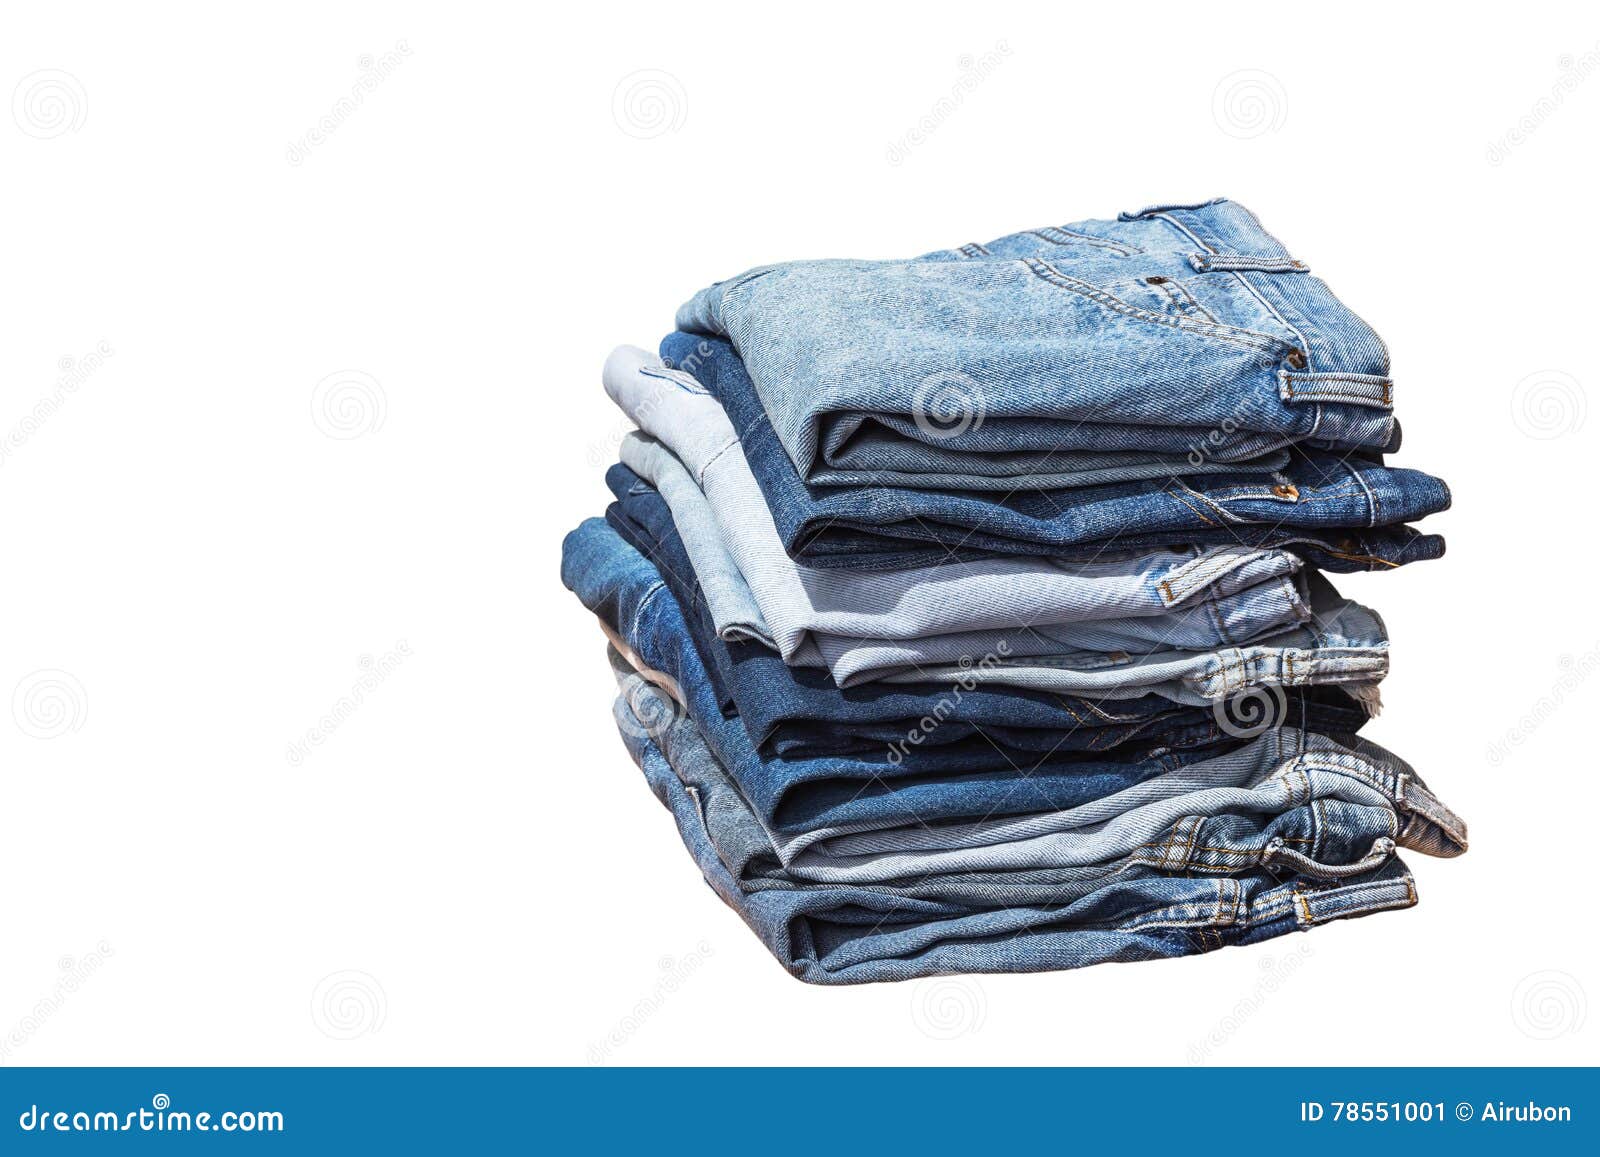 Group of Different Blue Jeans on White Background Stock Image - Image ...